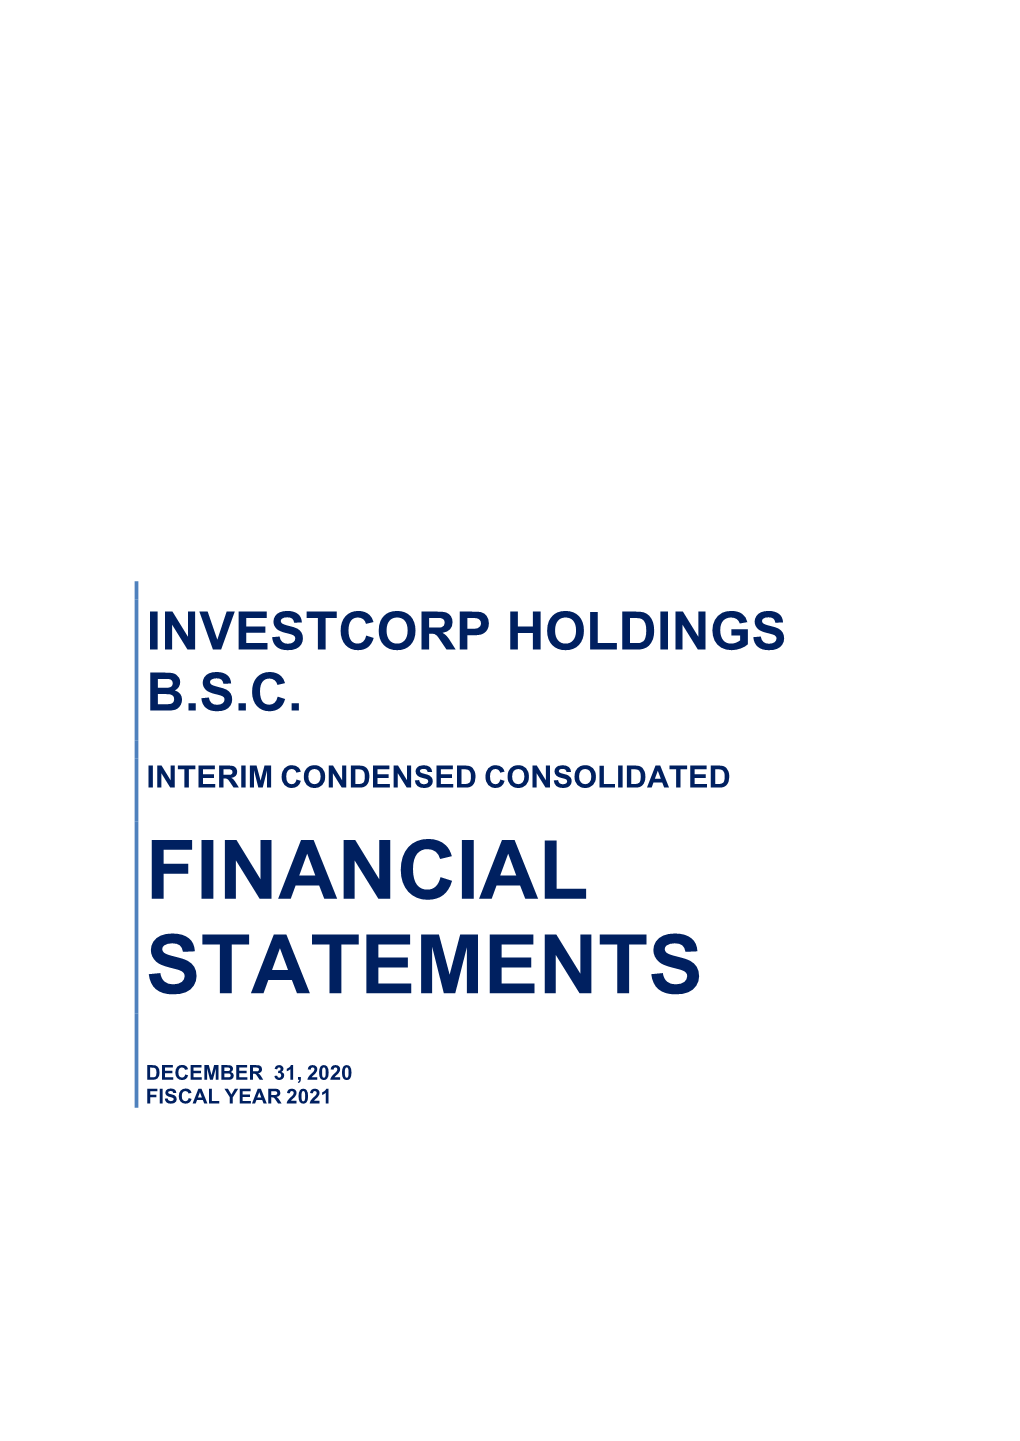 Investcorp Holdings B.S.C. Financial Statements